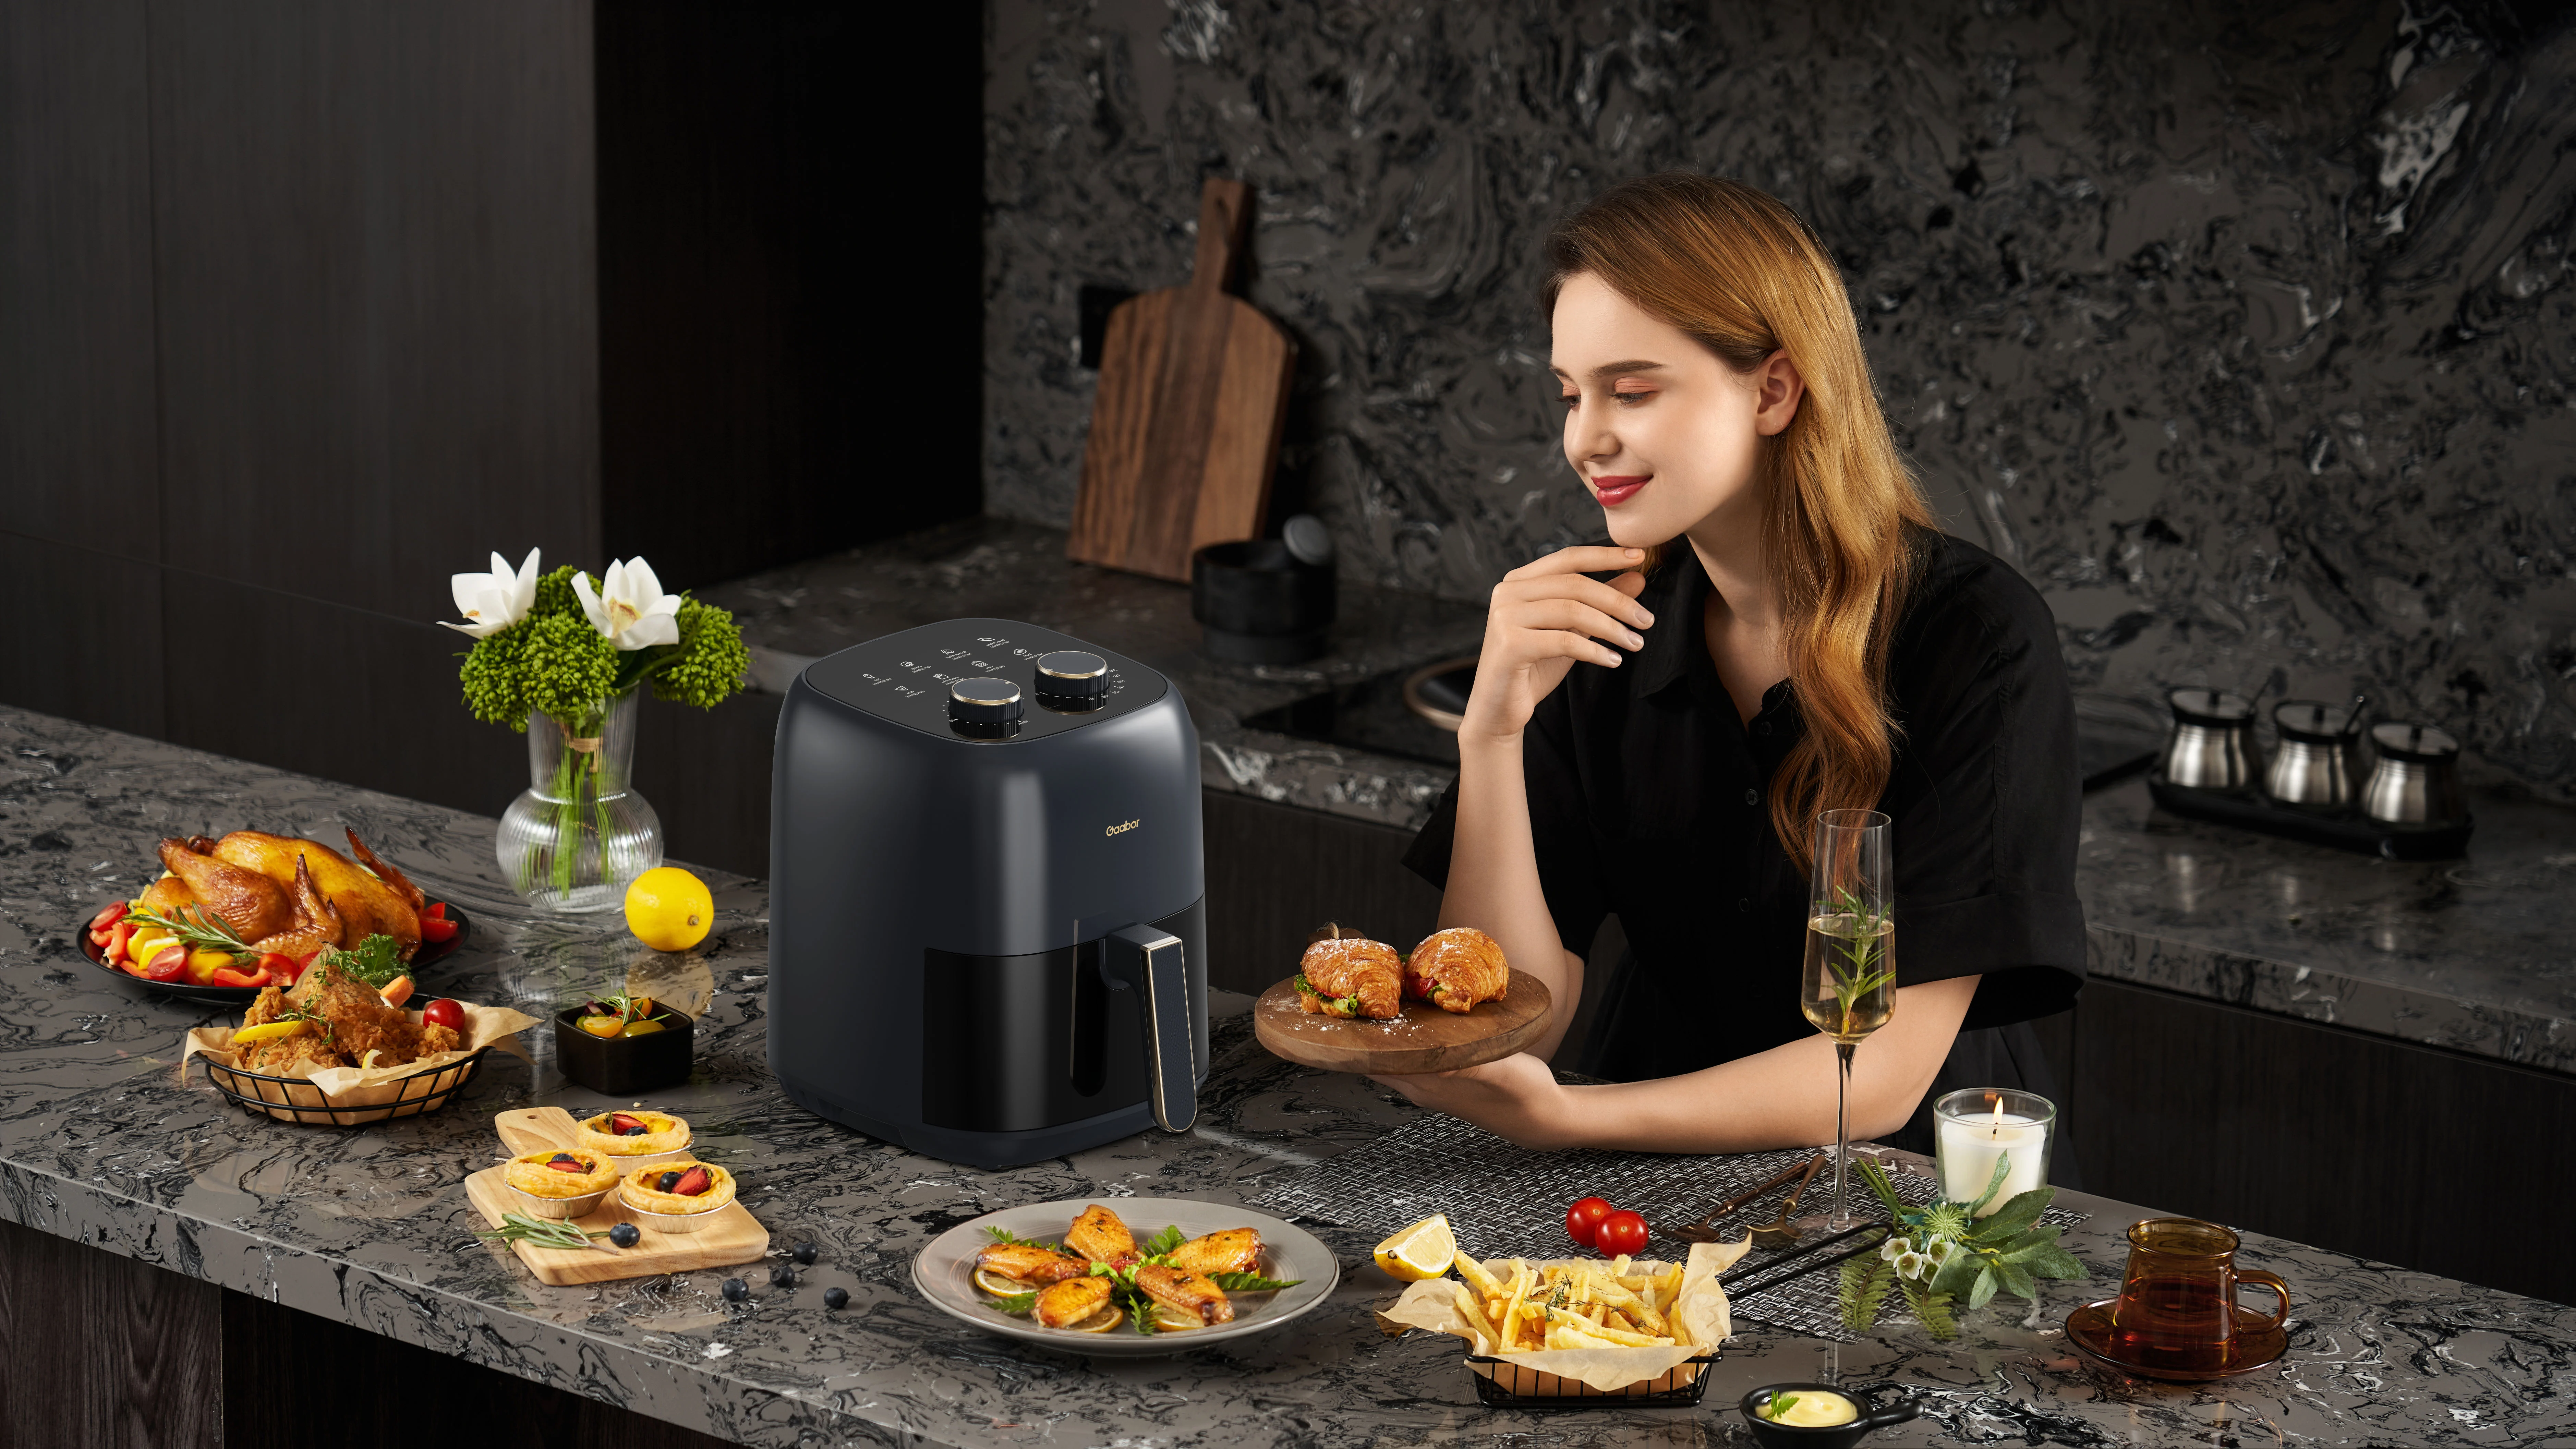 Air Fryer Large Capacity, Household Multifunctional Electric Airfryer